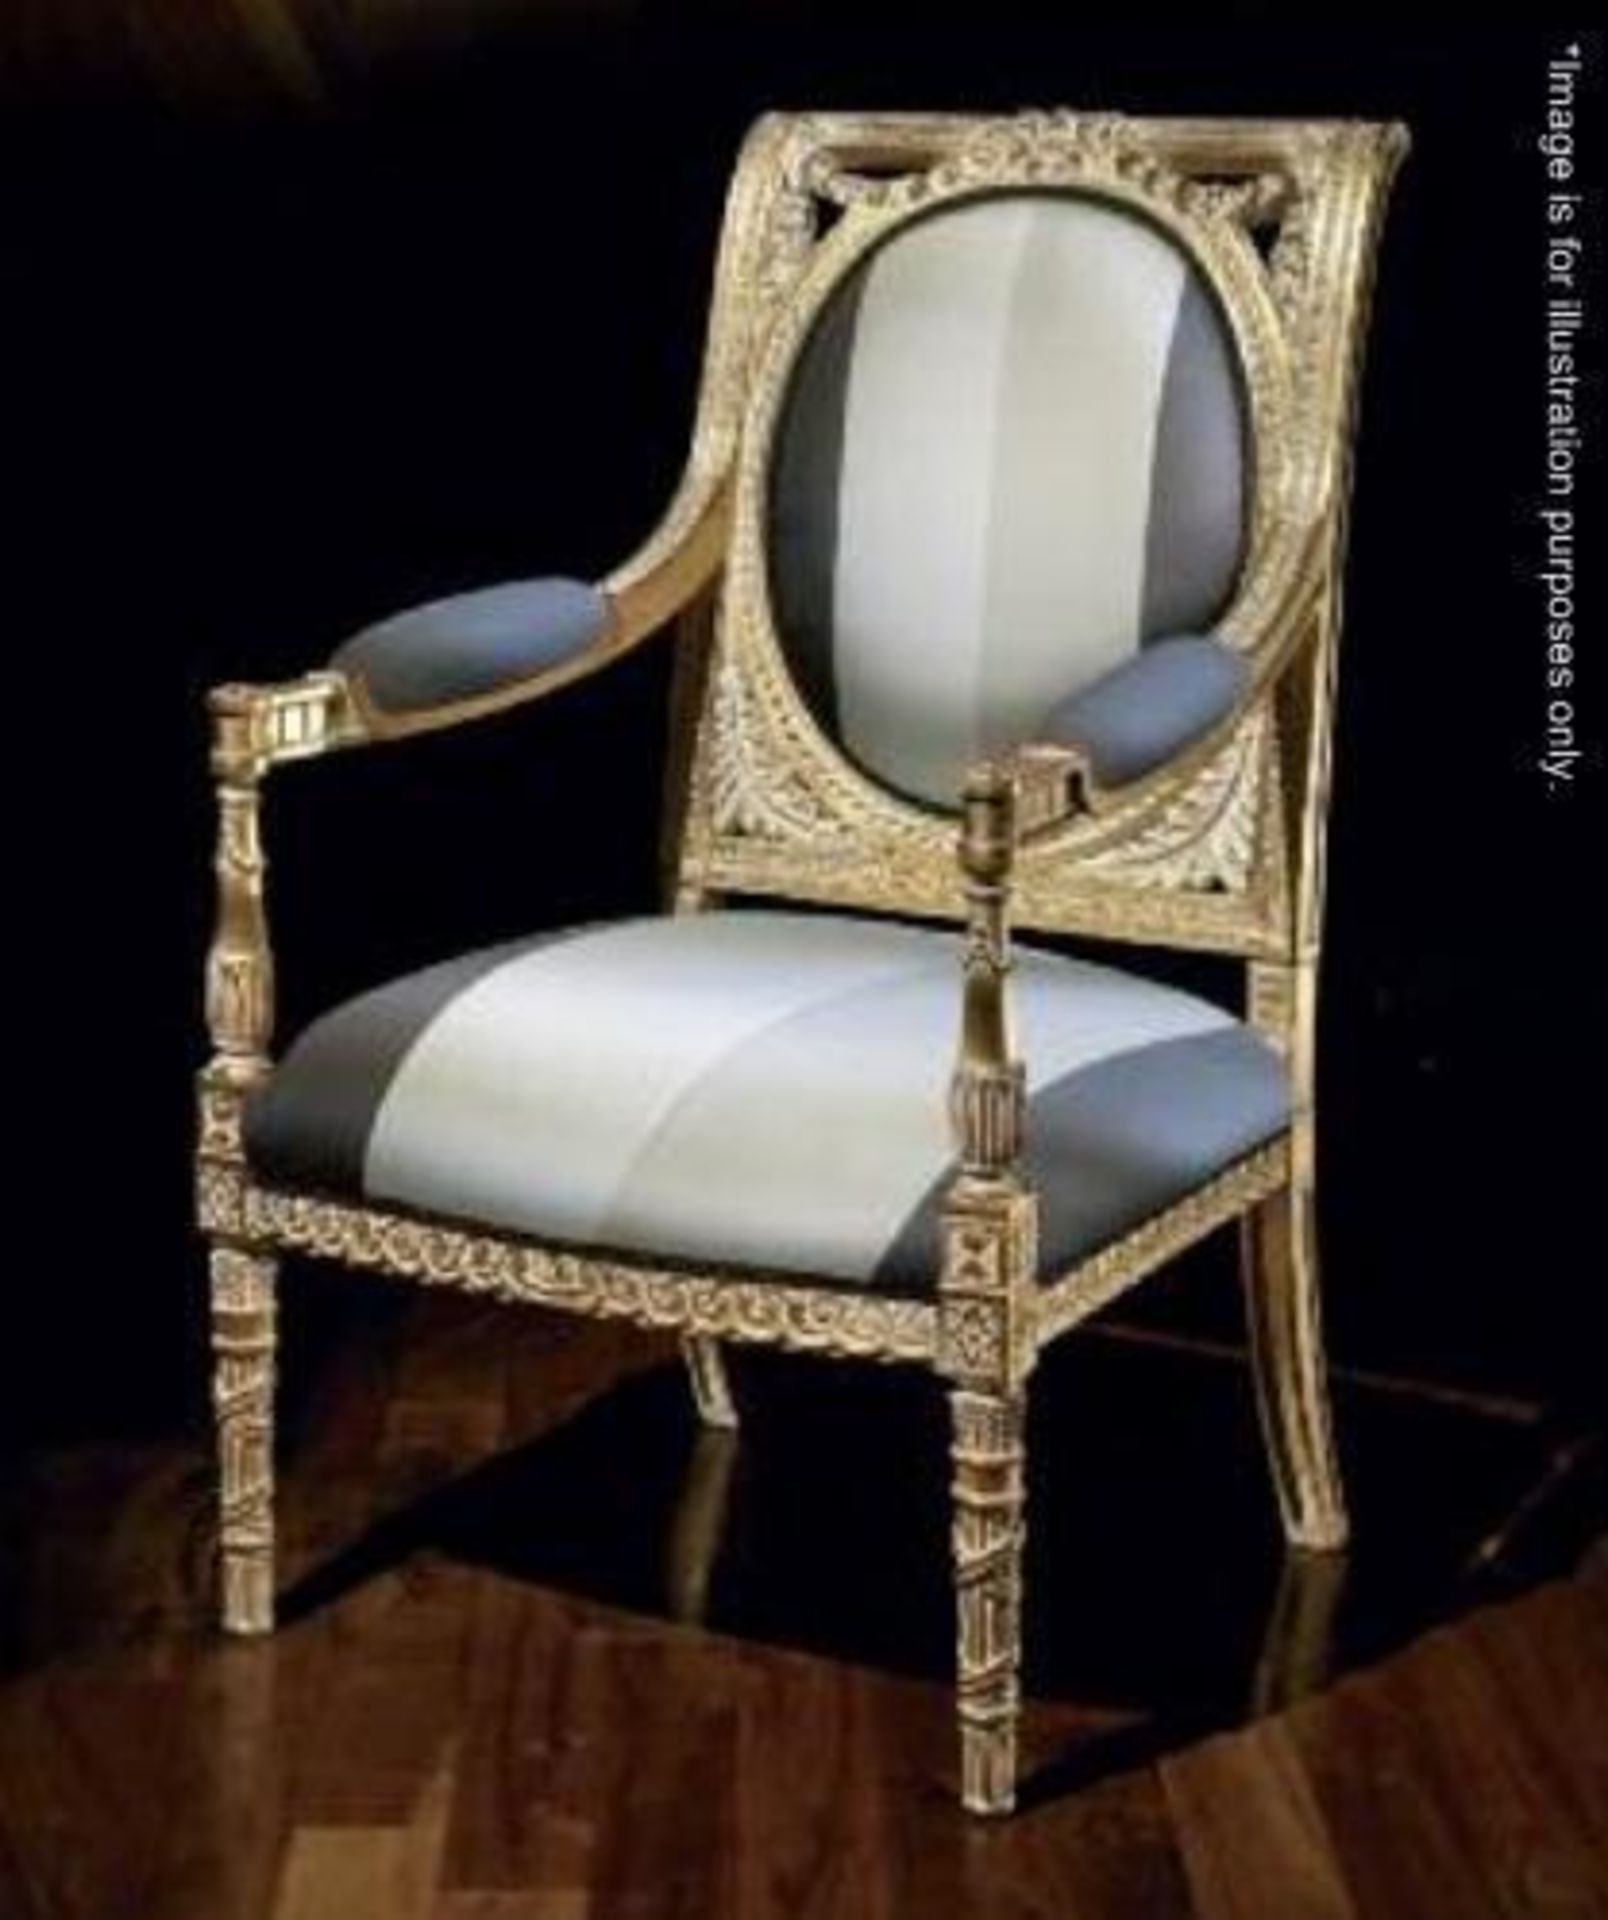 1 x DURESTA Flavia Chair - Features A Hand-Carved Hard Wood Frame With Hand-Stitched Coil Sprung Sea - Image 11 of 16